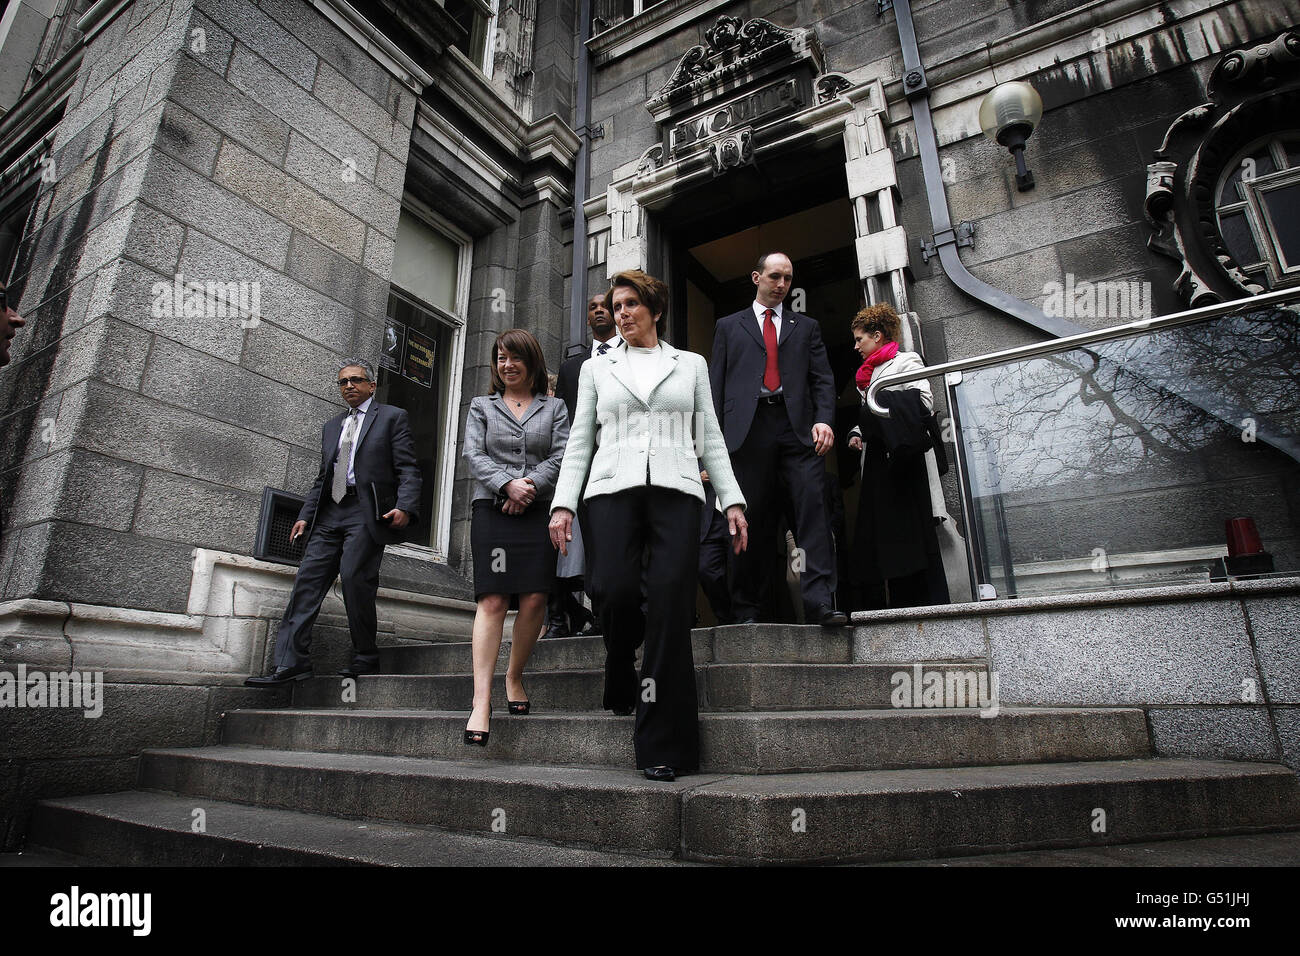 Nancy Pelosi, the Democratic Leader of the US House of Representatives (centre) along with her family and the American Delegation enjoy a tour of Trinity College in Dublin. Stock Photo